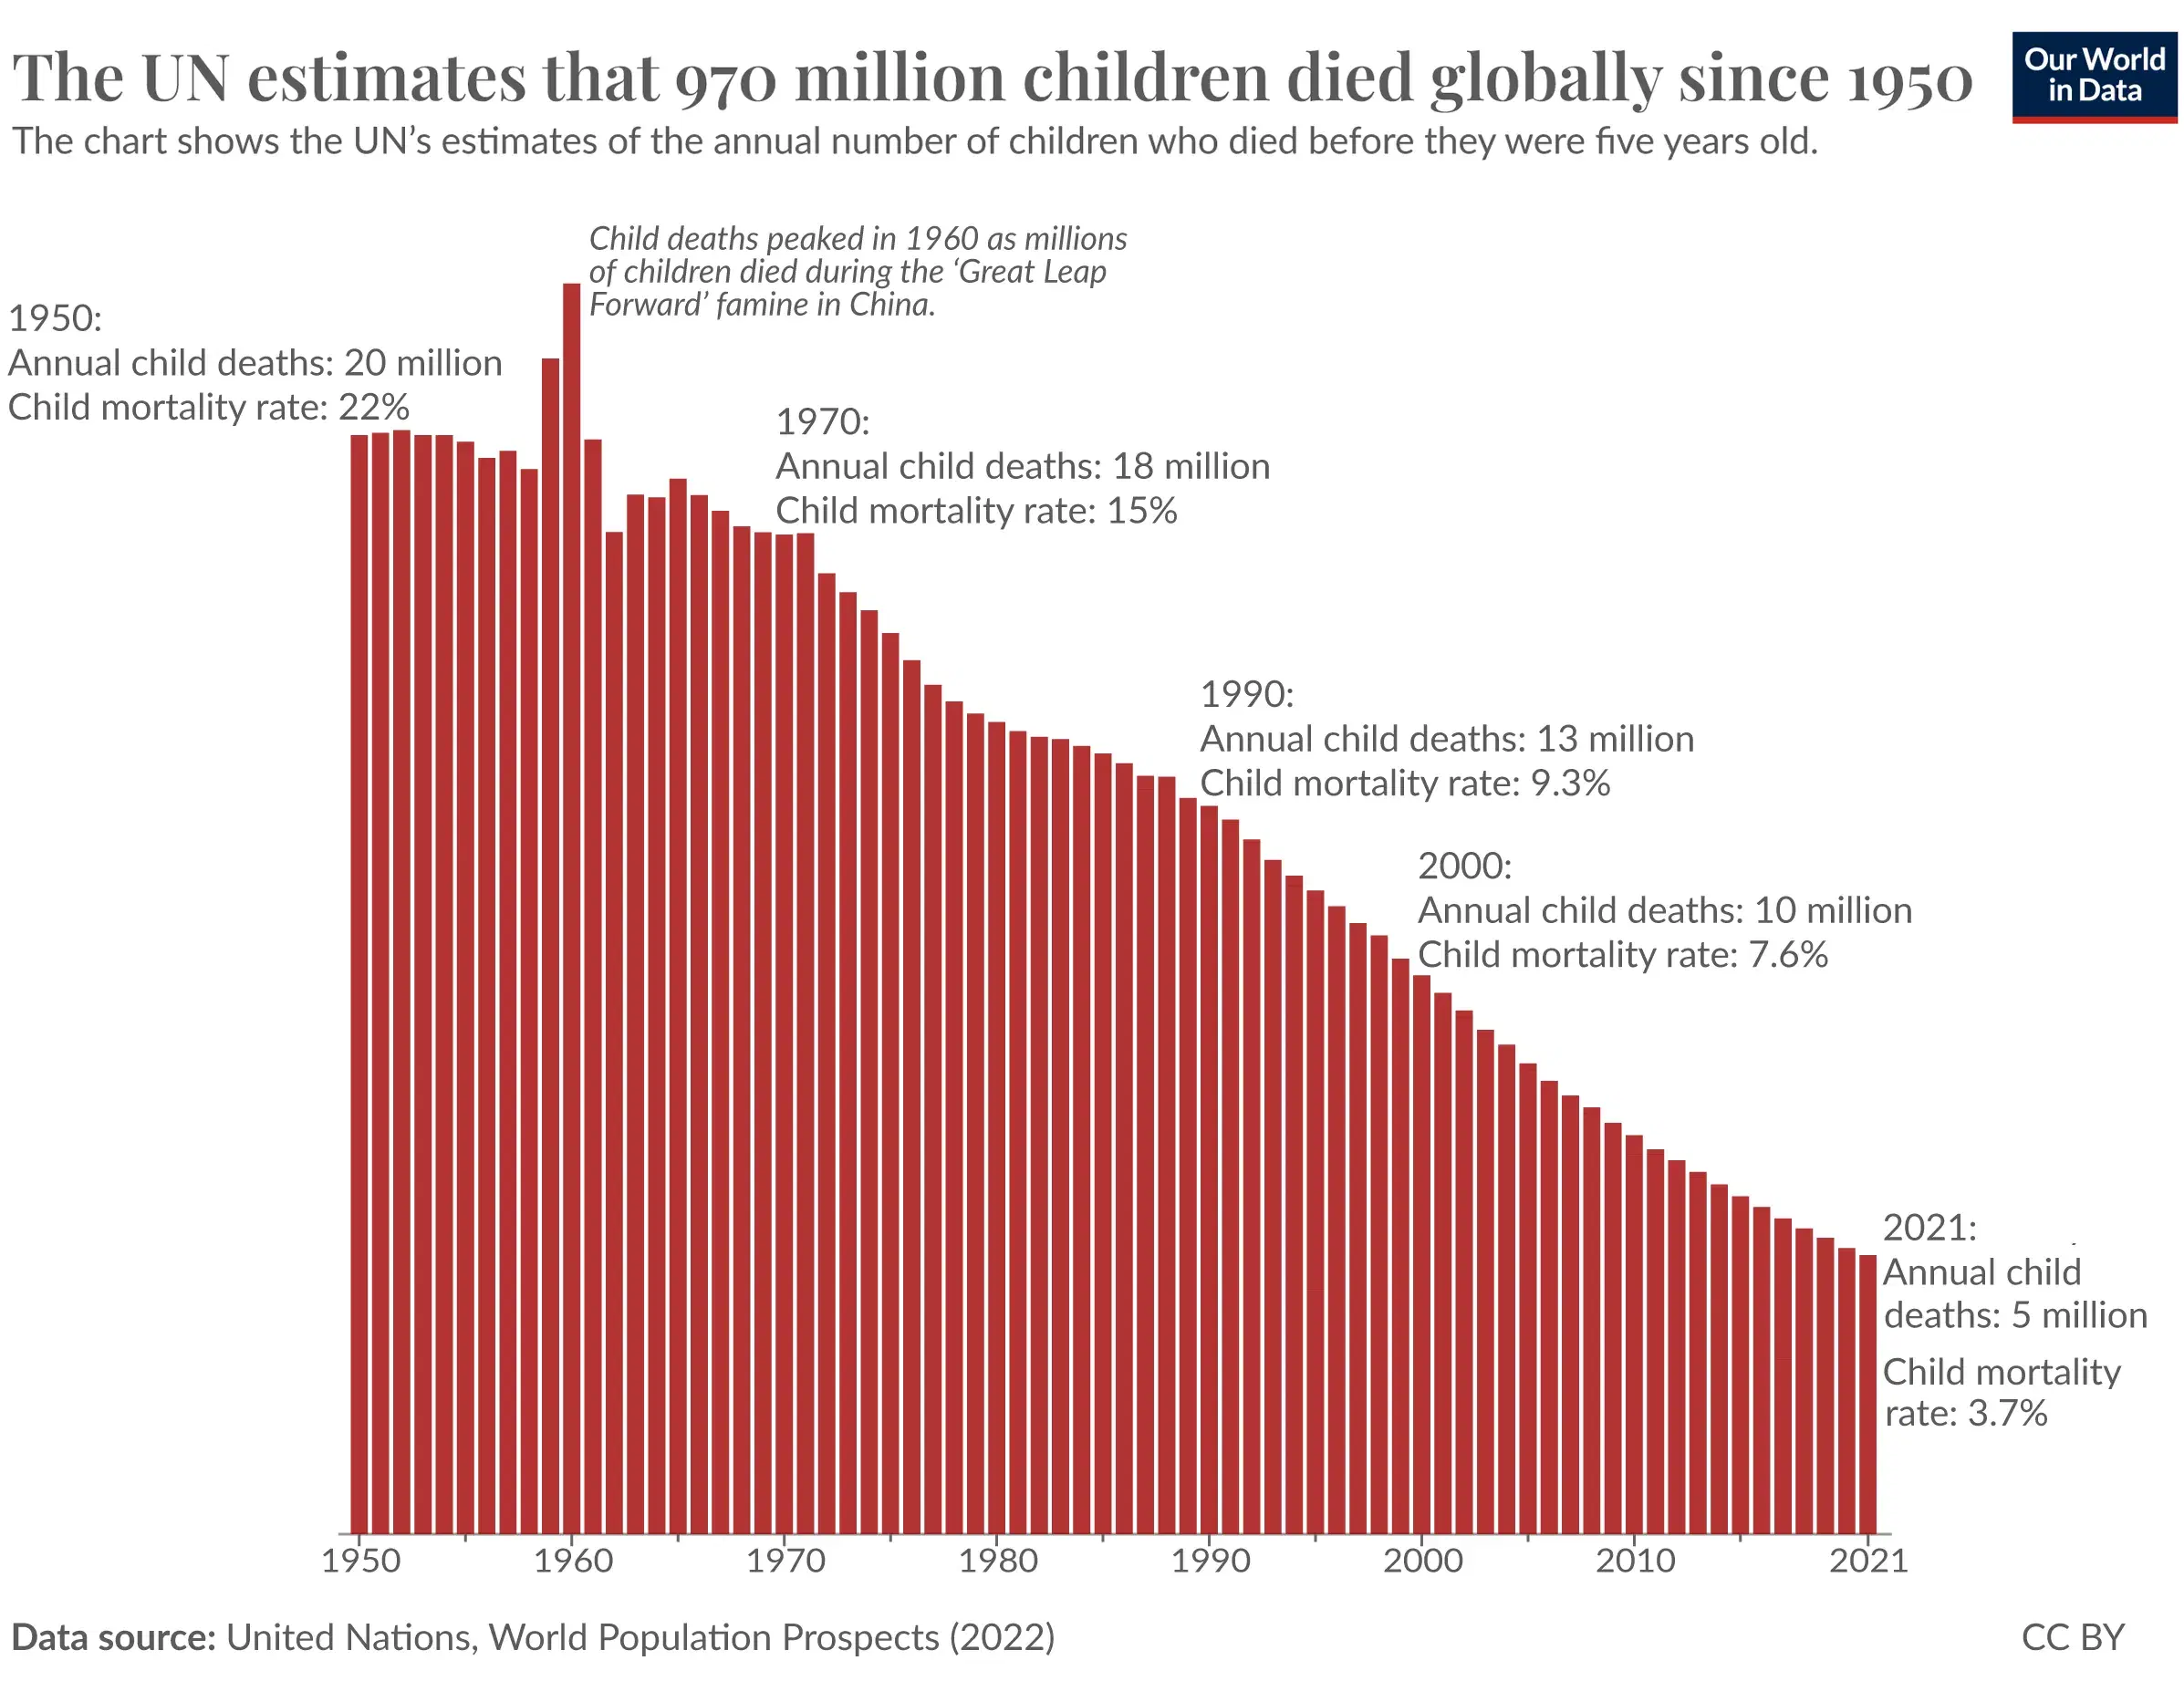 Almost One Billion Children Have Died Globally Since 1950